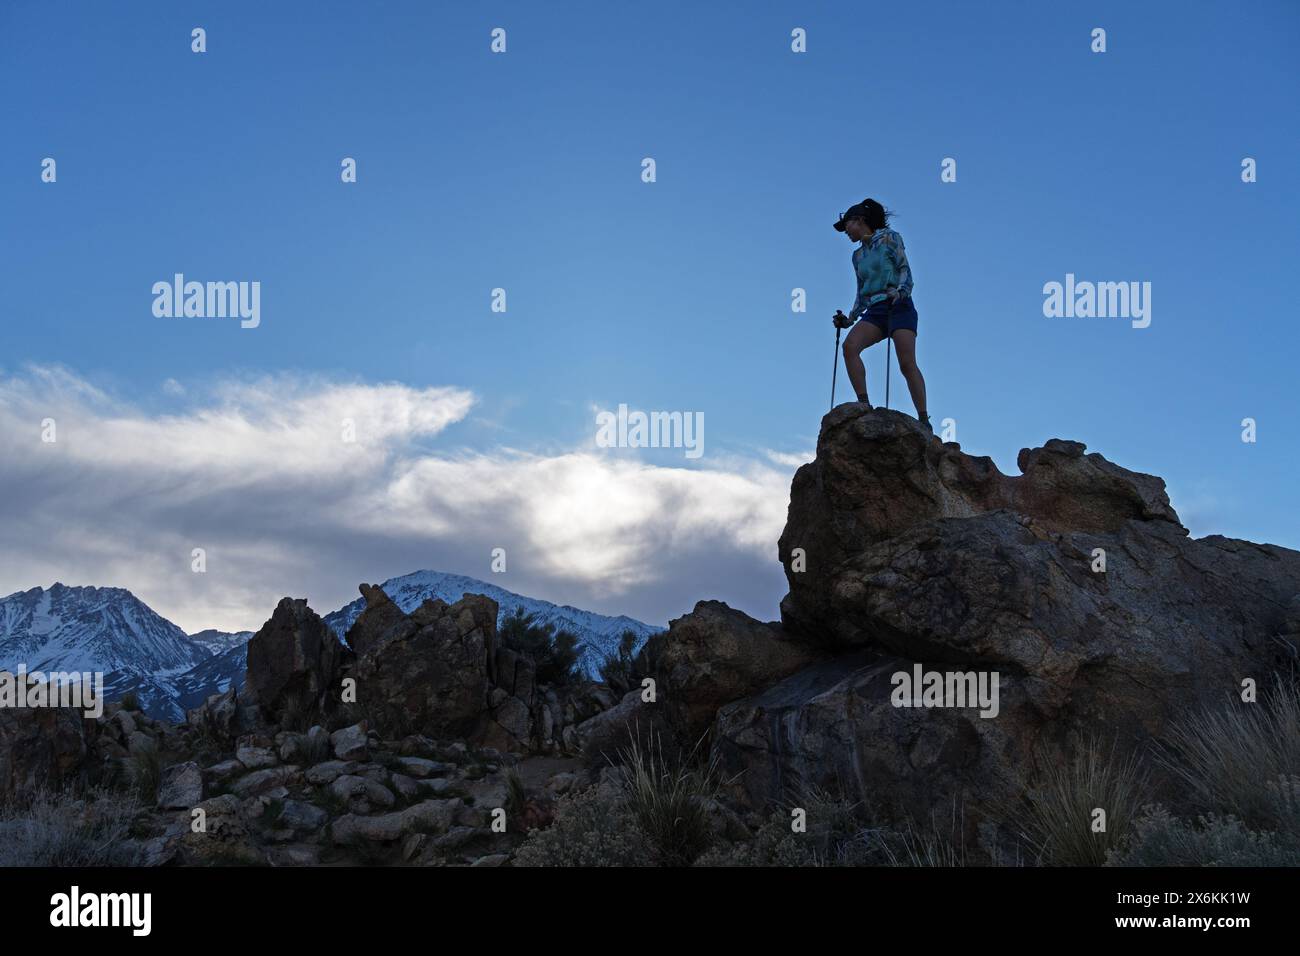 an active adult woman with trekking poles reaches the top of a windy Tungsten Peak in the Owens Valley near Bishop California Stock Photo